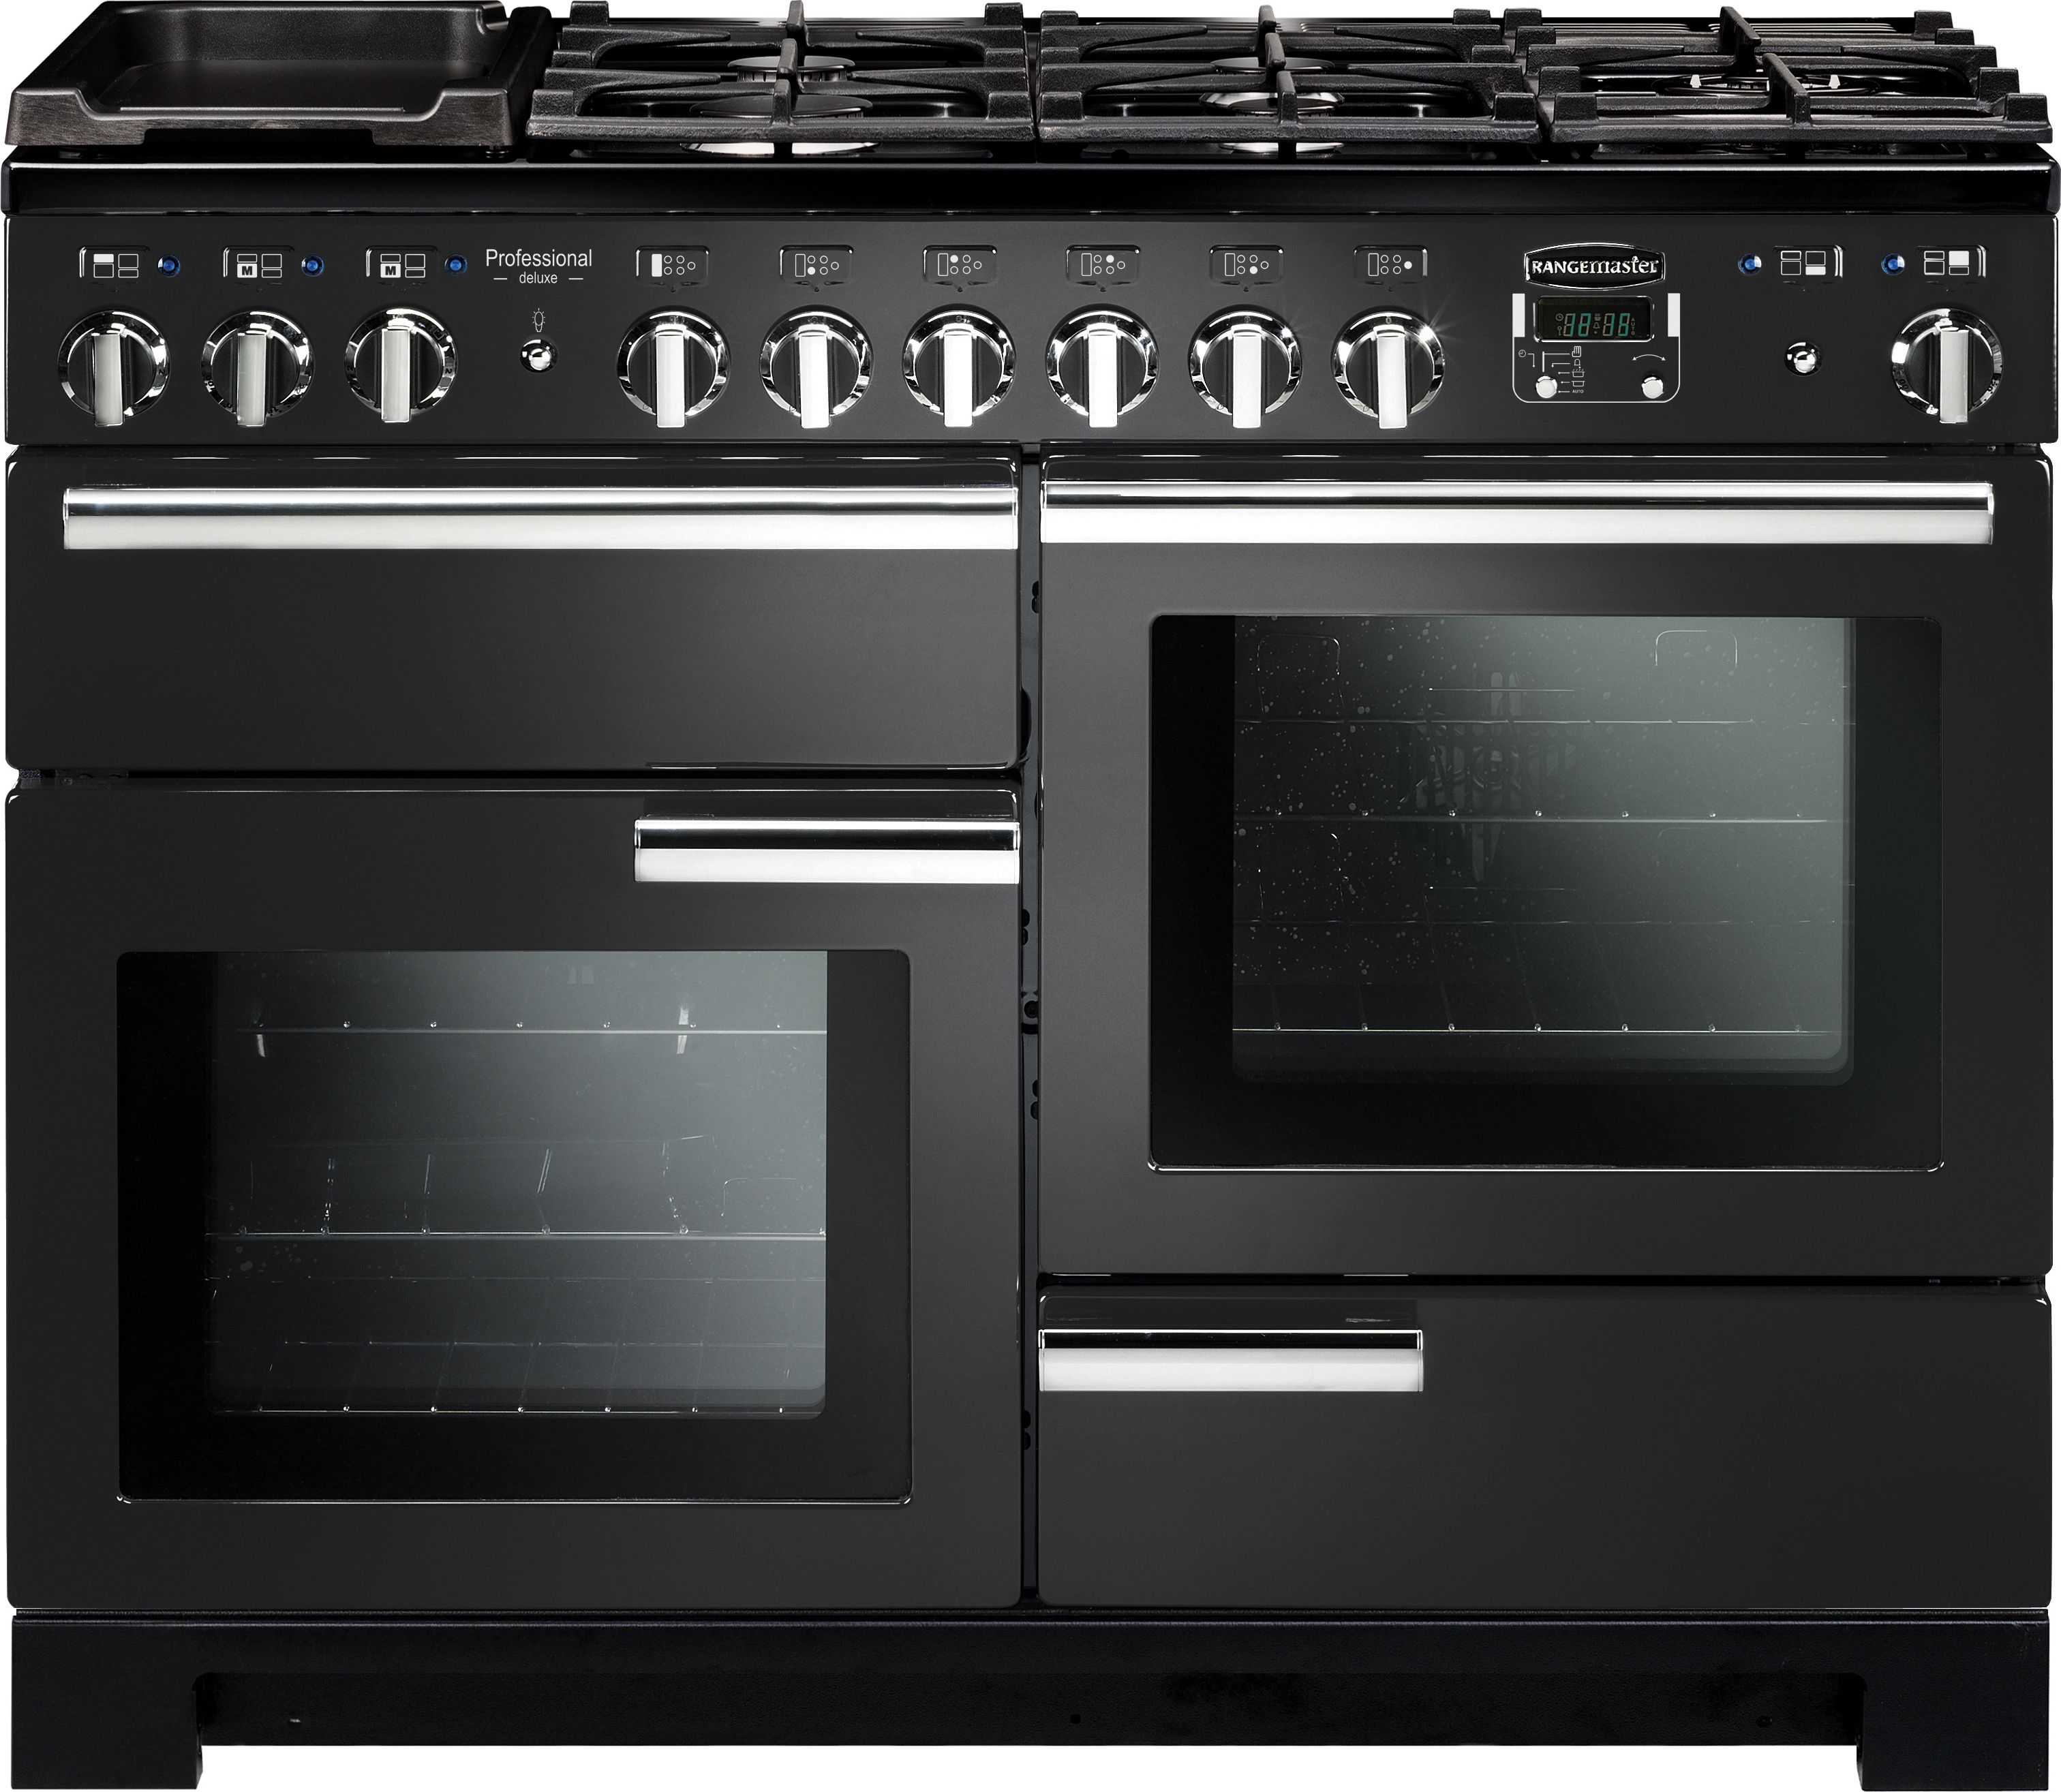 Rangemaster Professional Deluxe PDL110DFFCB/C 110cm Dual Fuel Range Cooker - Charcoal Black - A/A/A Rated, Charcoal Black